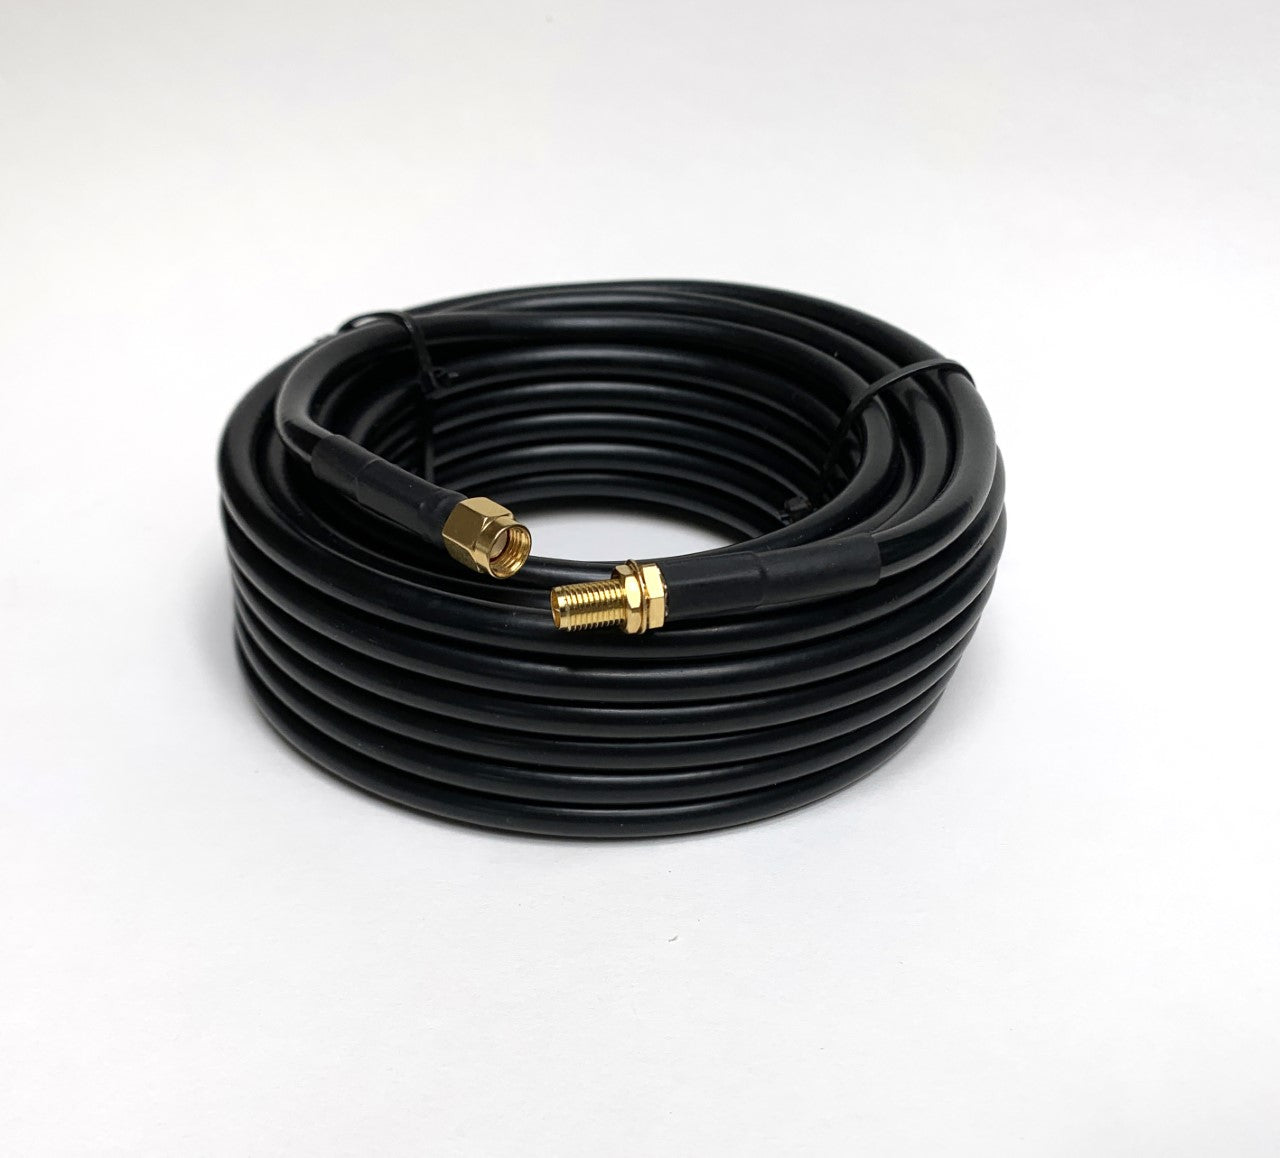 EnviroMonitor Antenna Extension Cable - SKU 7692-025